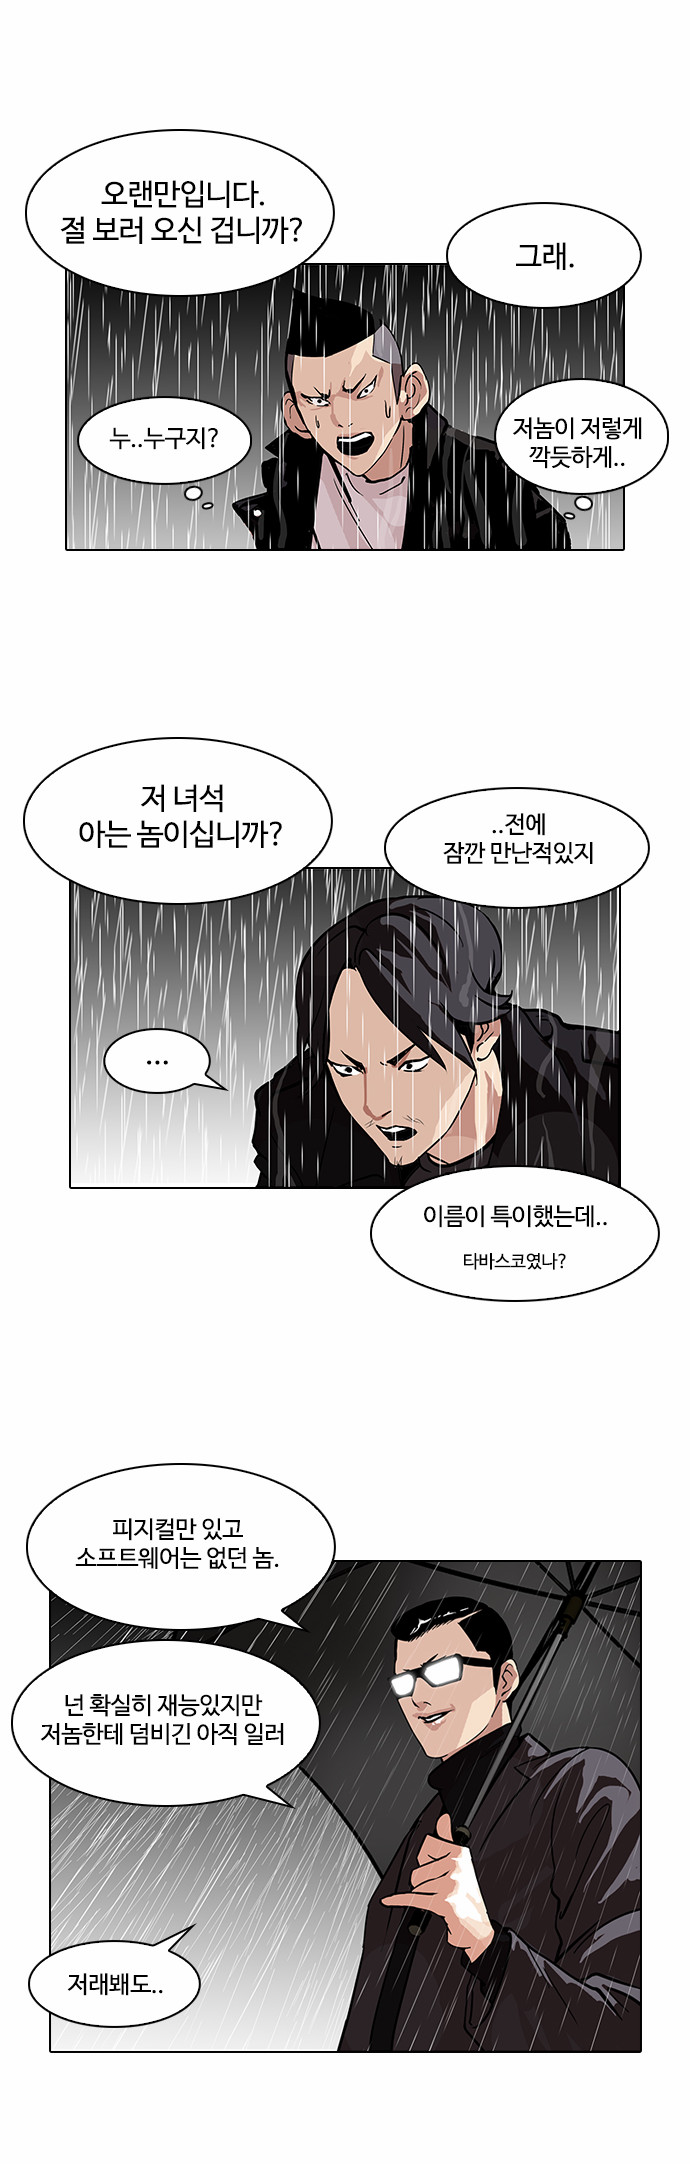 Lookism - Chapter 89 - Page 3